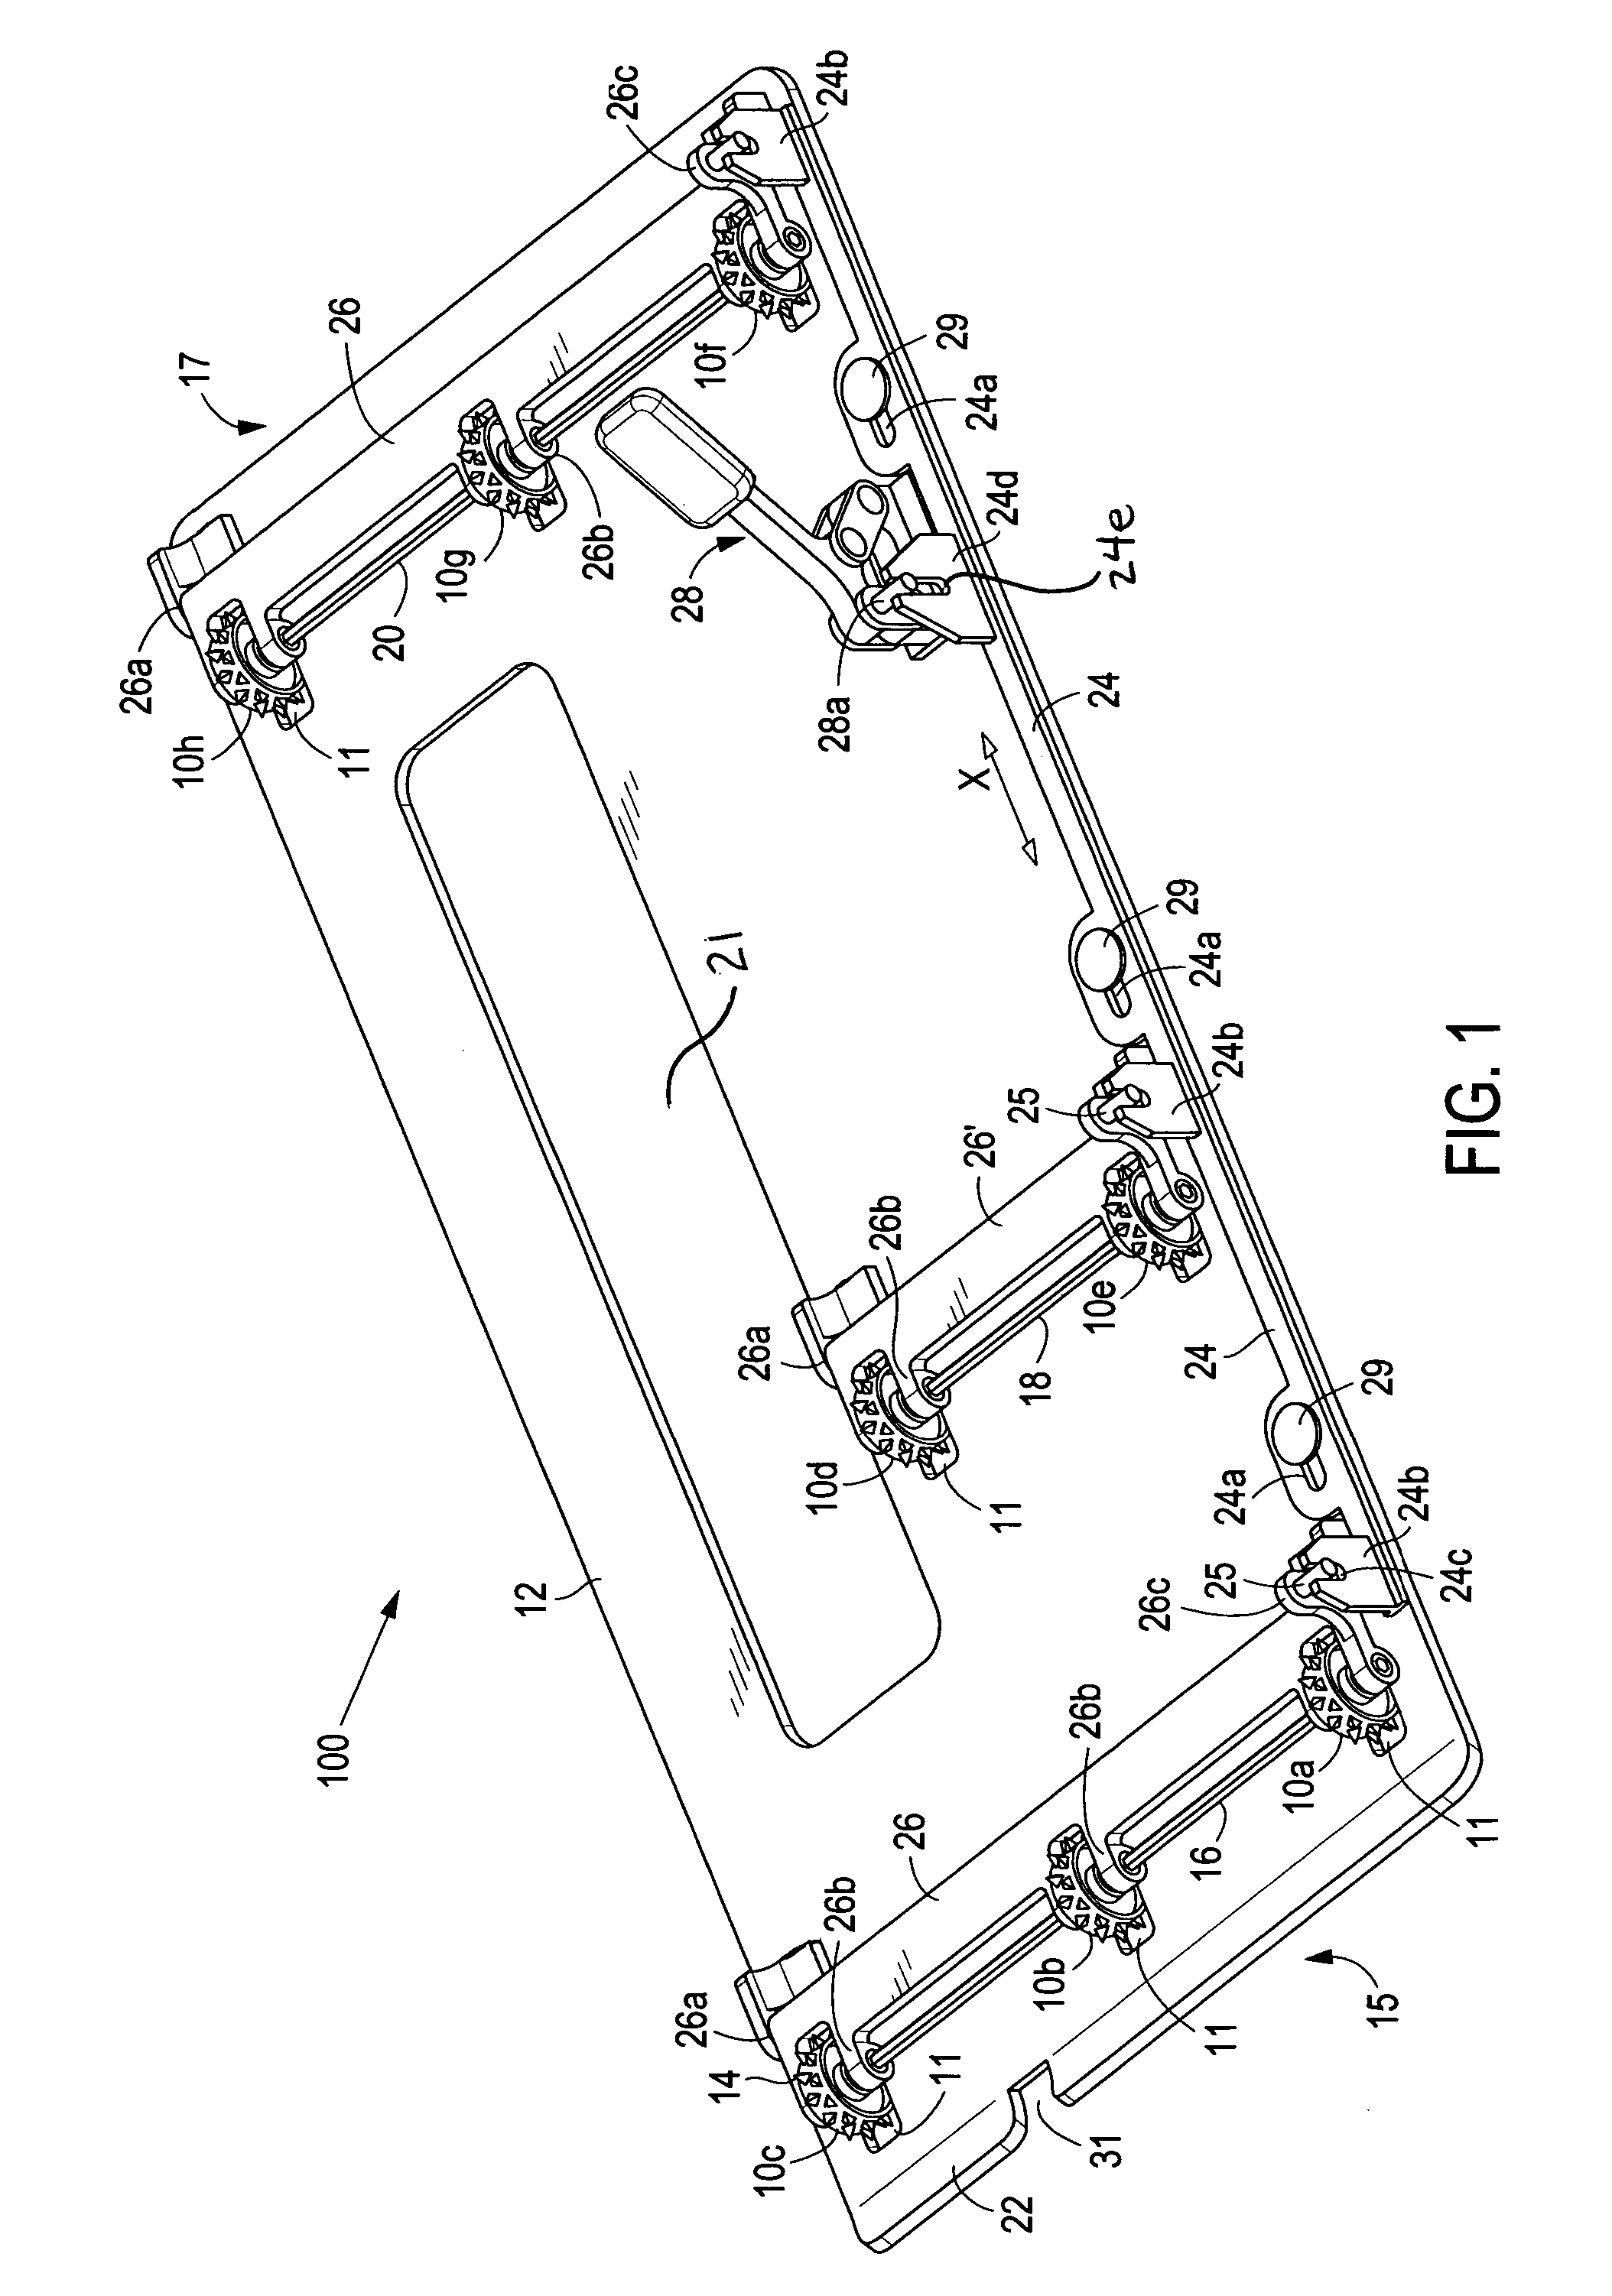 Circular saw for facilitating straight cuts and/or cuts at a desired angle relative to a workpiece edge